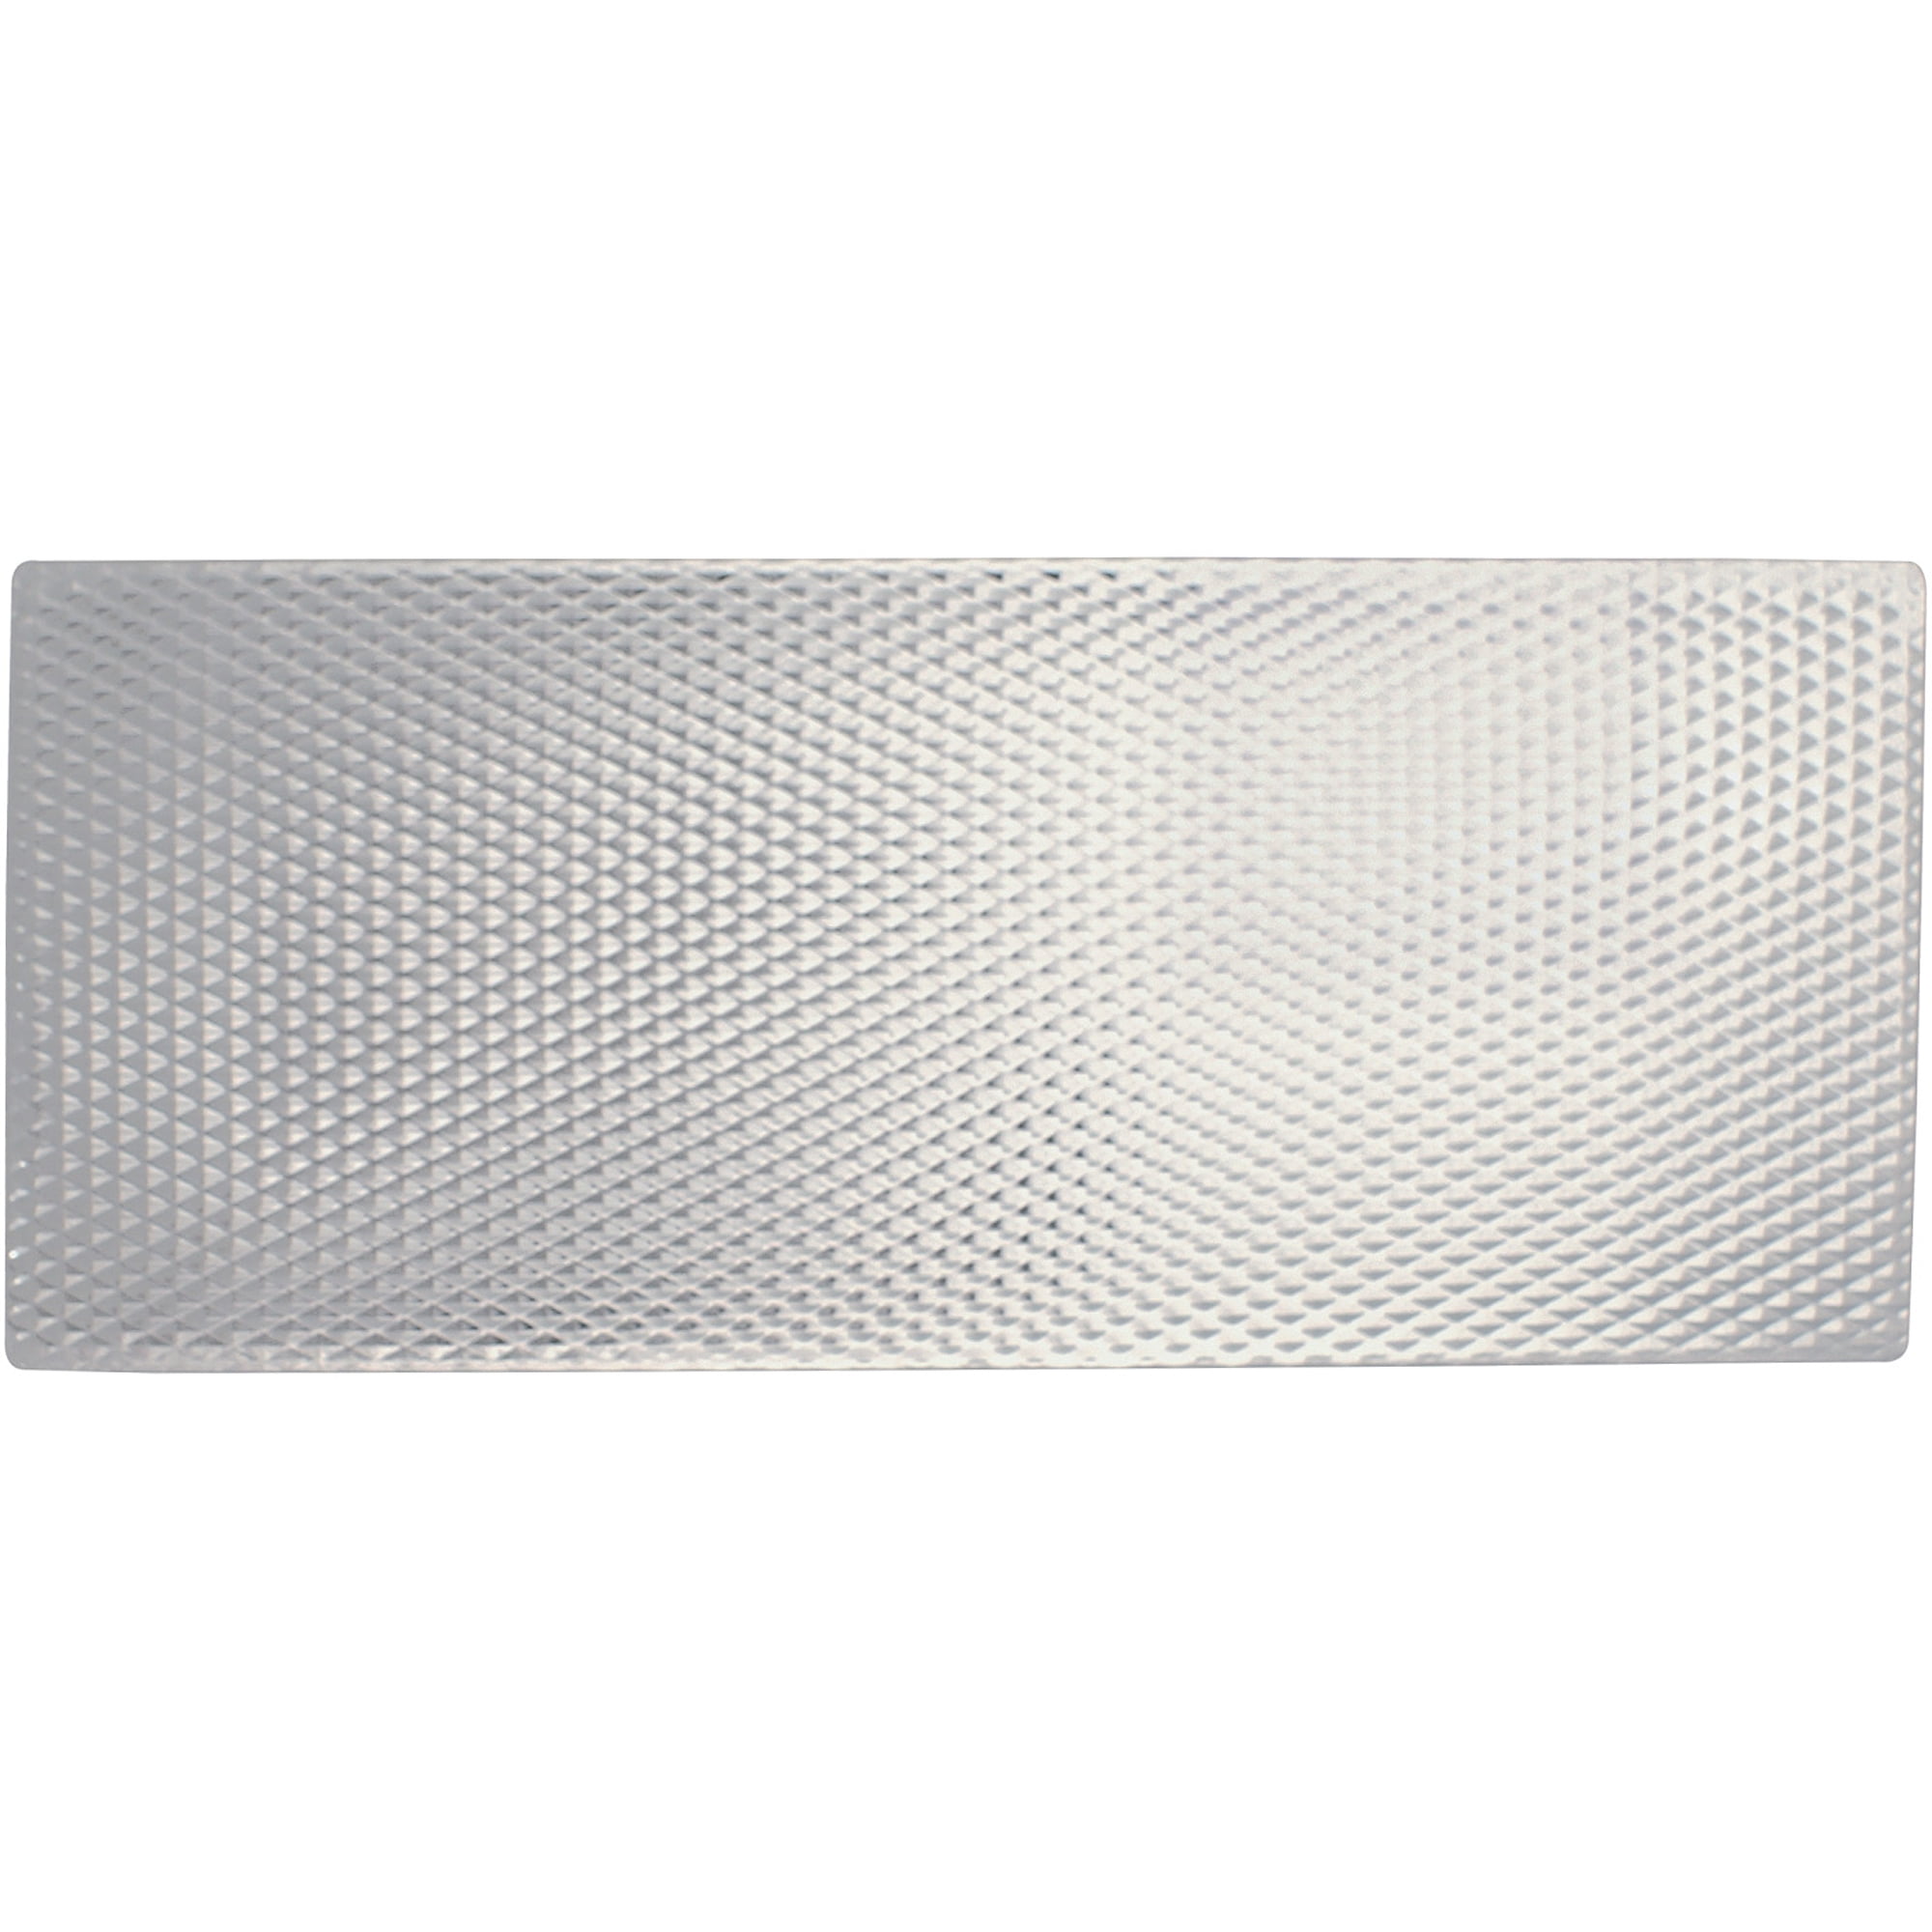 Range Kleen 14 x 17 in. Silverwave Counter Mat SM1417SWR - The Home Depot